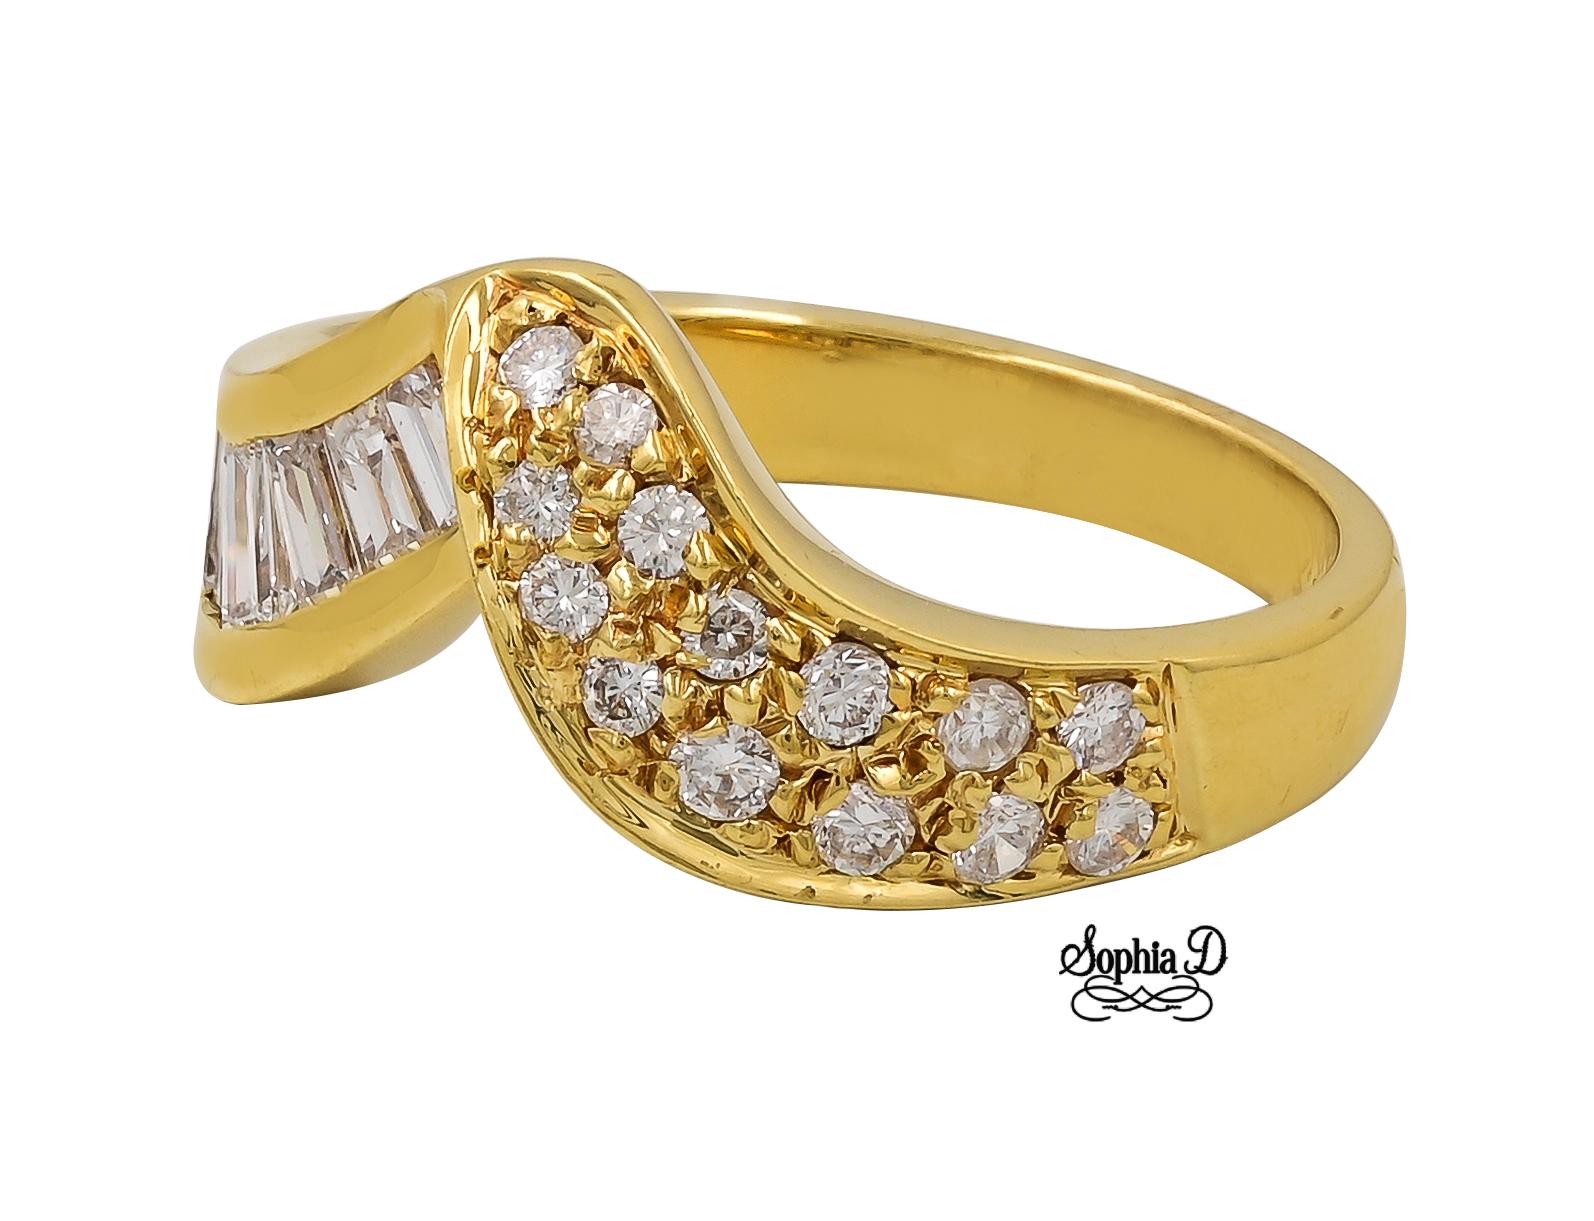 18K yellow gold ring with emerald cut diamonds and round diamonds.

Sophia D by Joseph Dardashti LTD has been known worldwide for 35 years and are inspired by classic Art Deco design that merges with modern manufacturing techniques.  